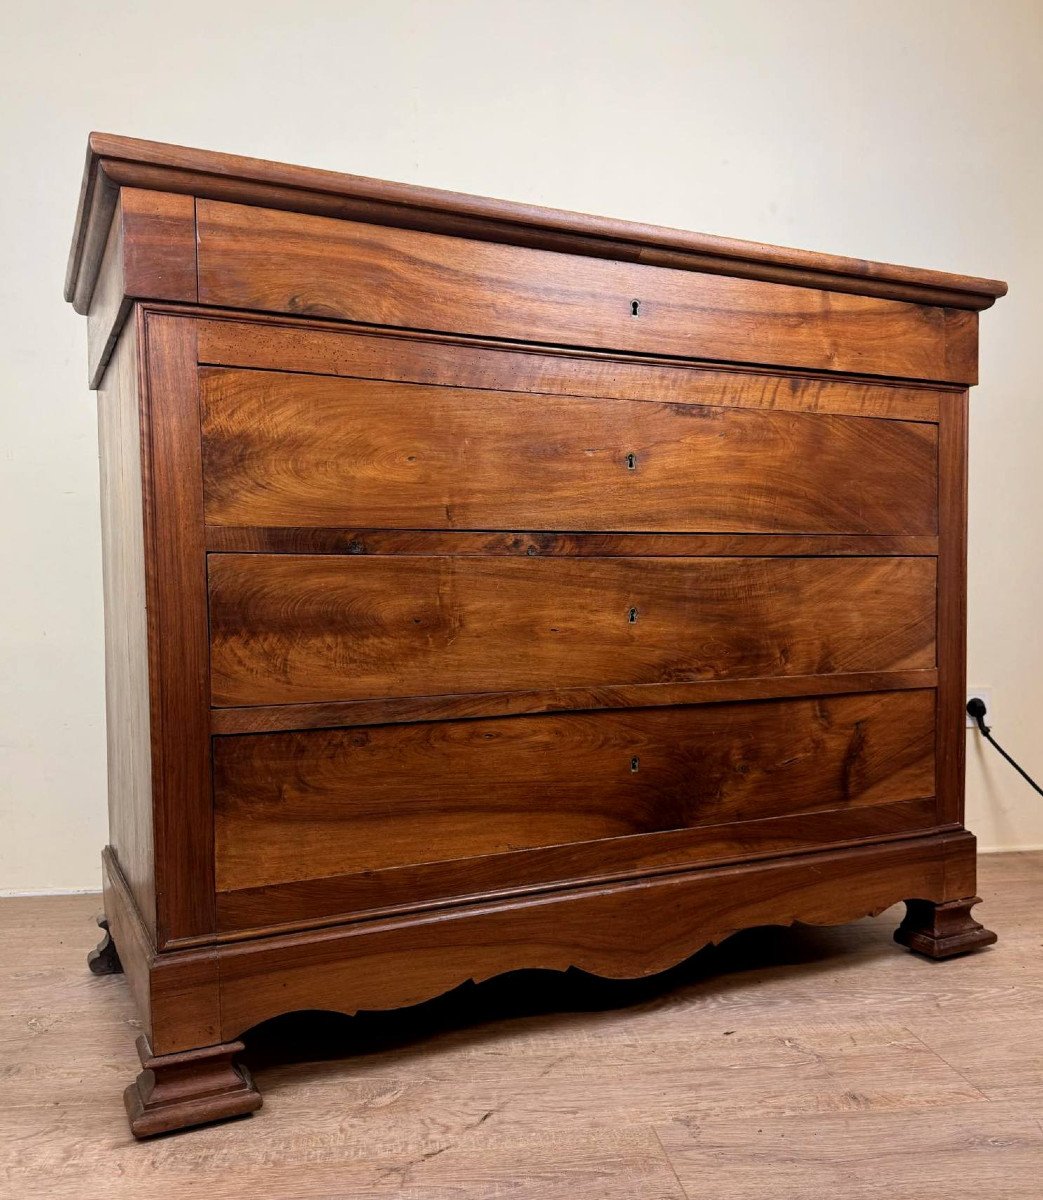 Louis Philippe Period Chest Of Drawers In Walnut